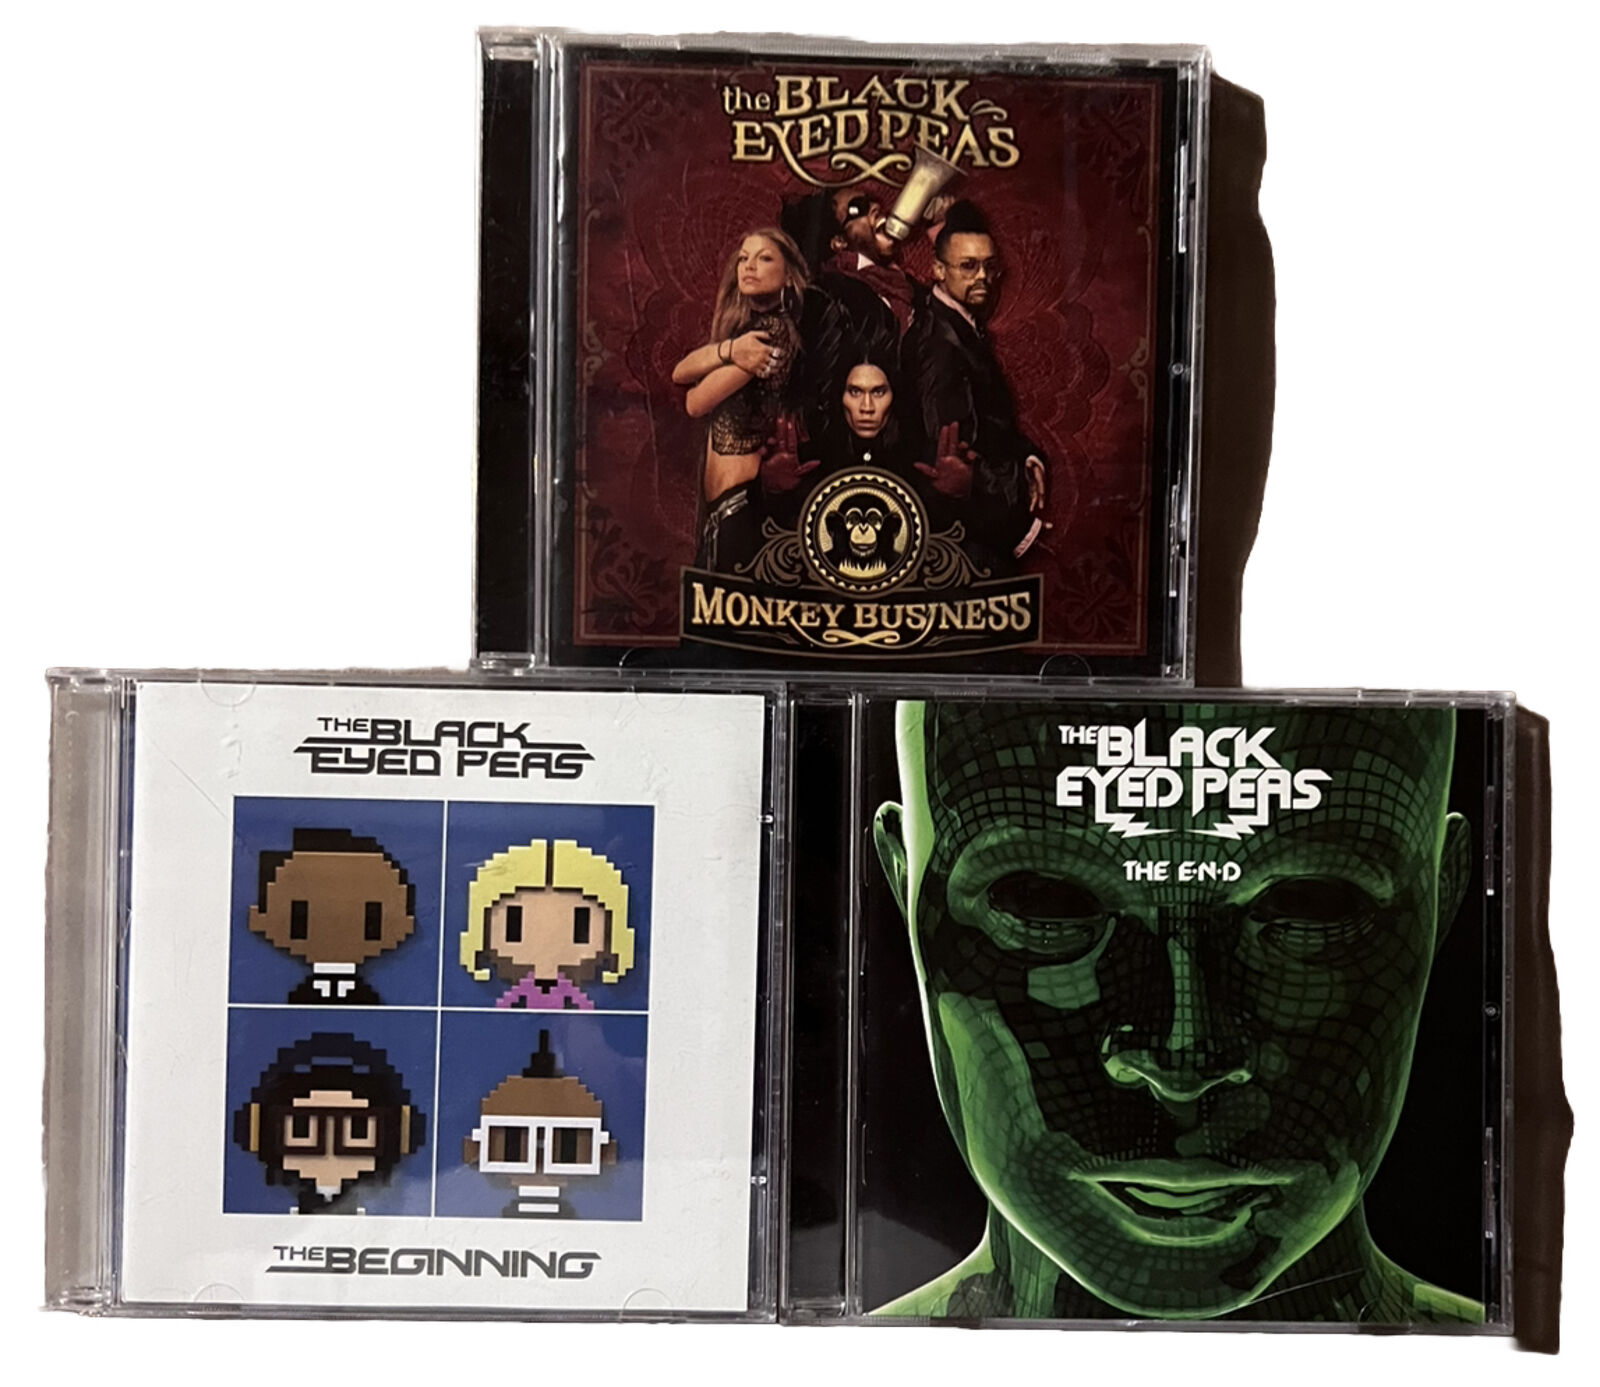 Black Eyed Peas 3 CD Lot - Very Good Condition